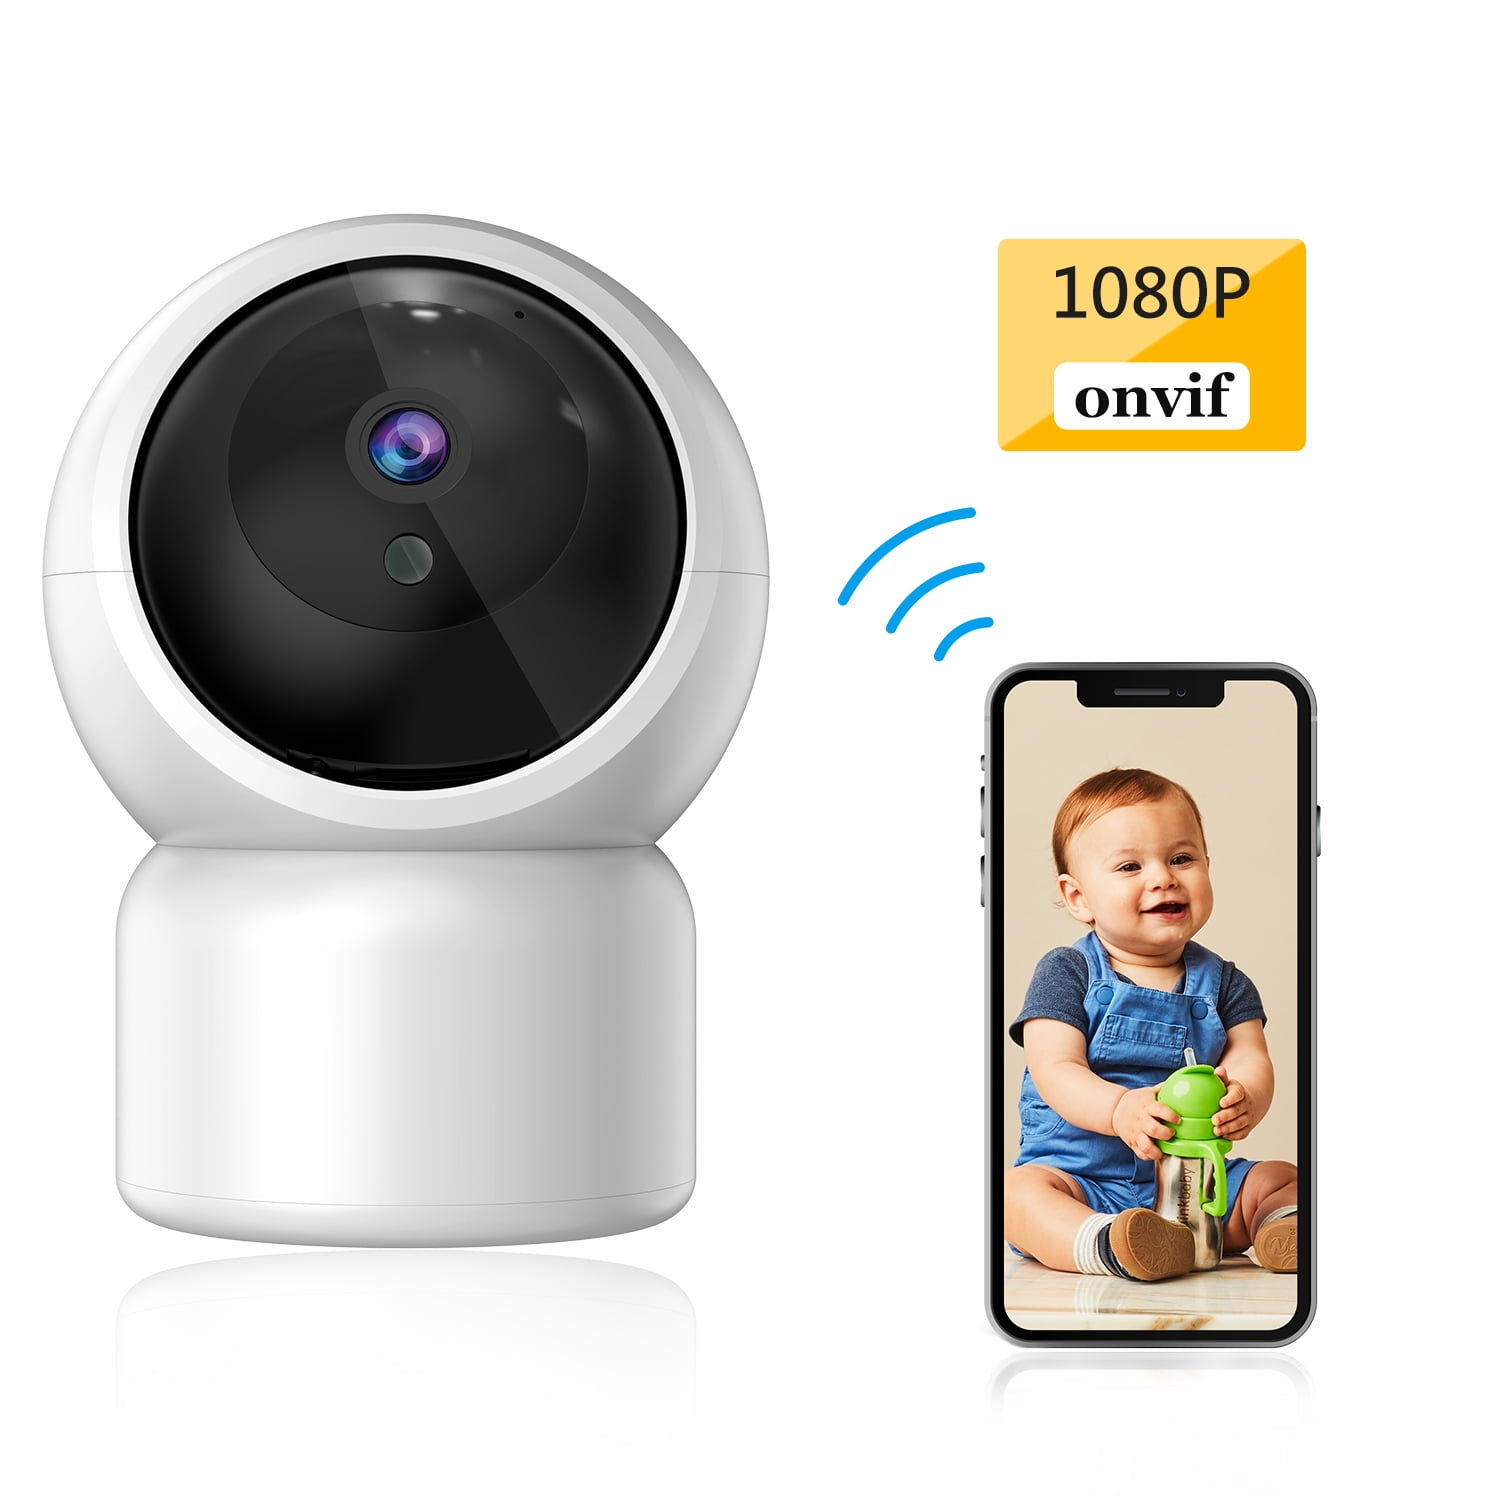 Hooked IP Camera HD Night Vision Baby Monitor Vedio Home Security Audio 1080P UK 